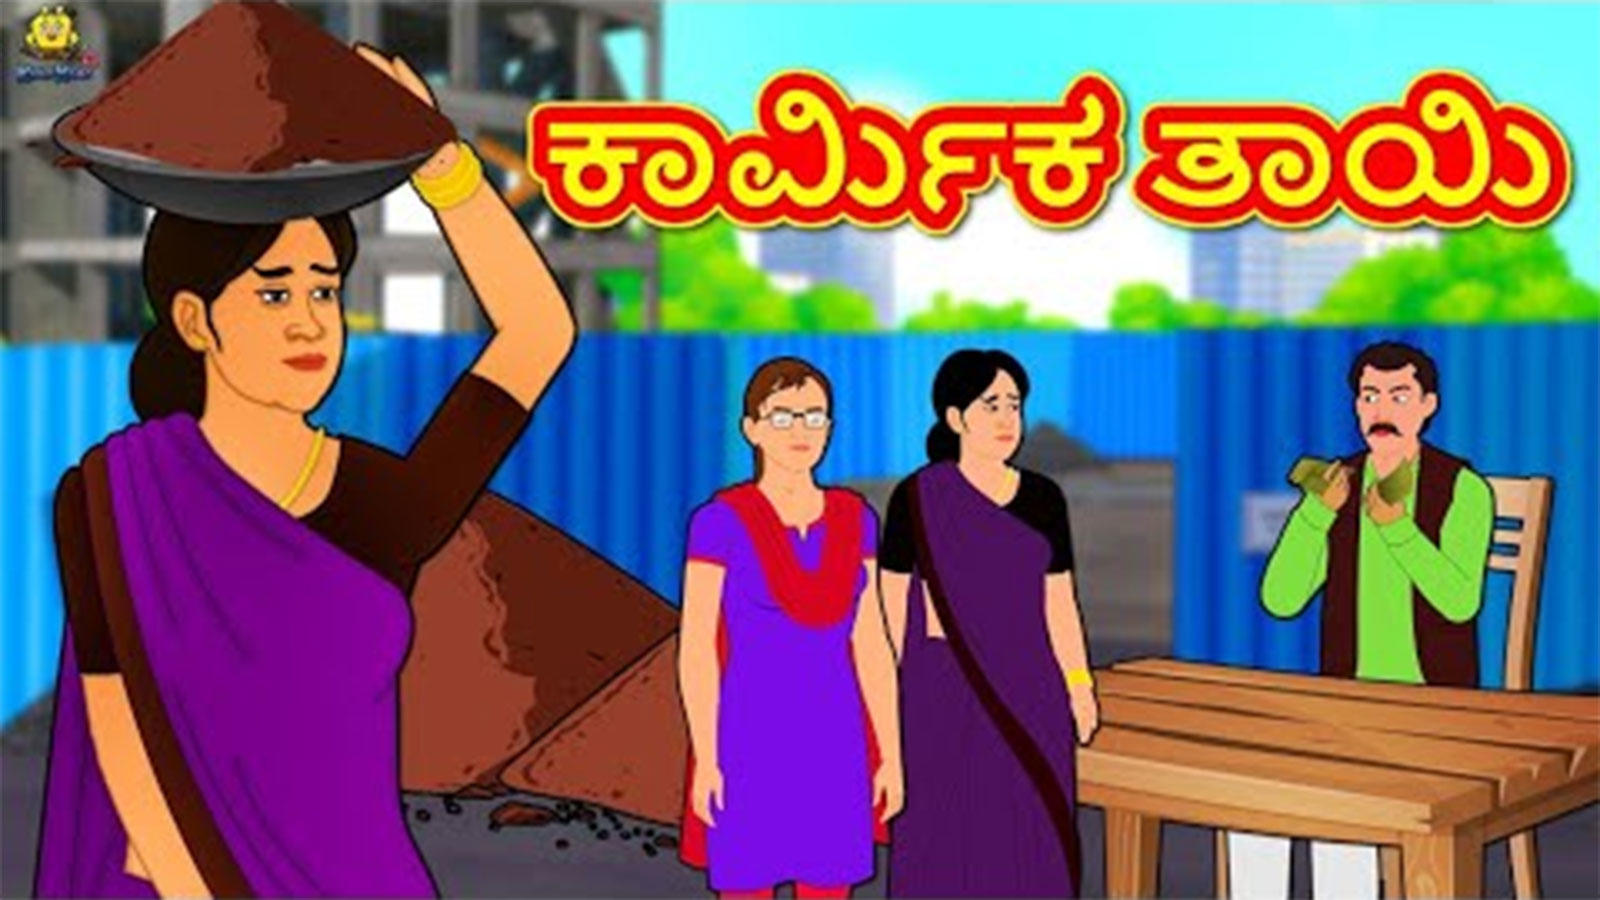 Watch Latest Kids Kannada Nursery Story 'ಕಾರ್ಮಿಕ ತಾಯಿ - The Labor Mother'  for Kids - Check Out Children's Nursery Stories, Baby Songs, Fairy Tales In  Kannada | Entertainment - Times of India Videos